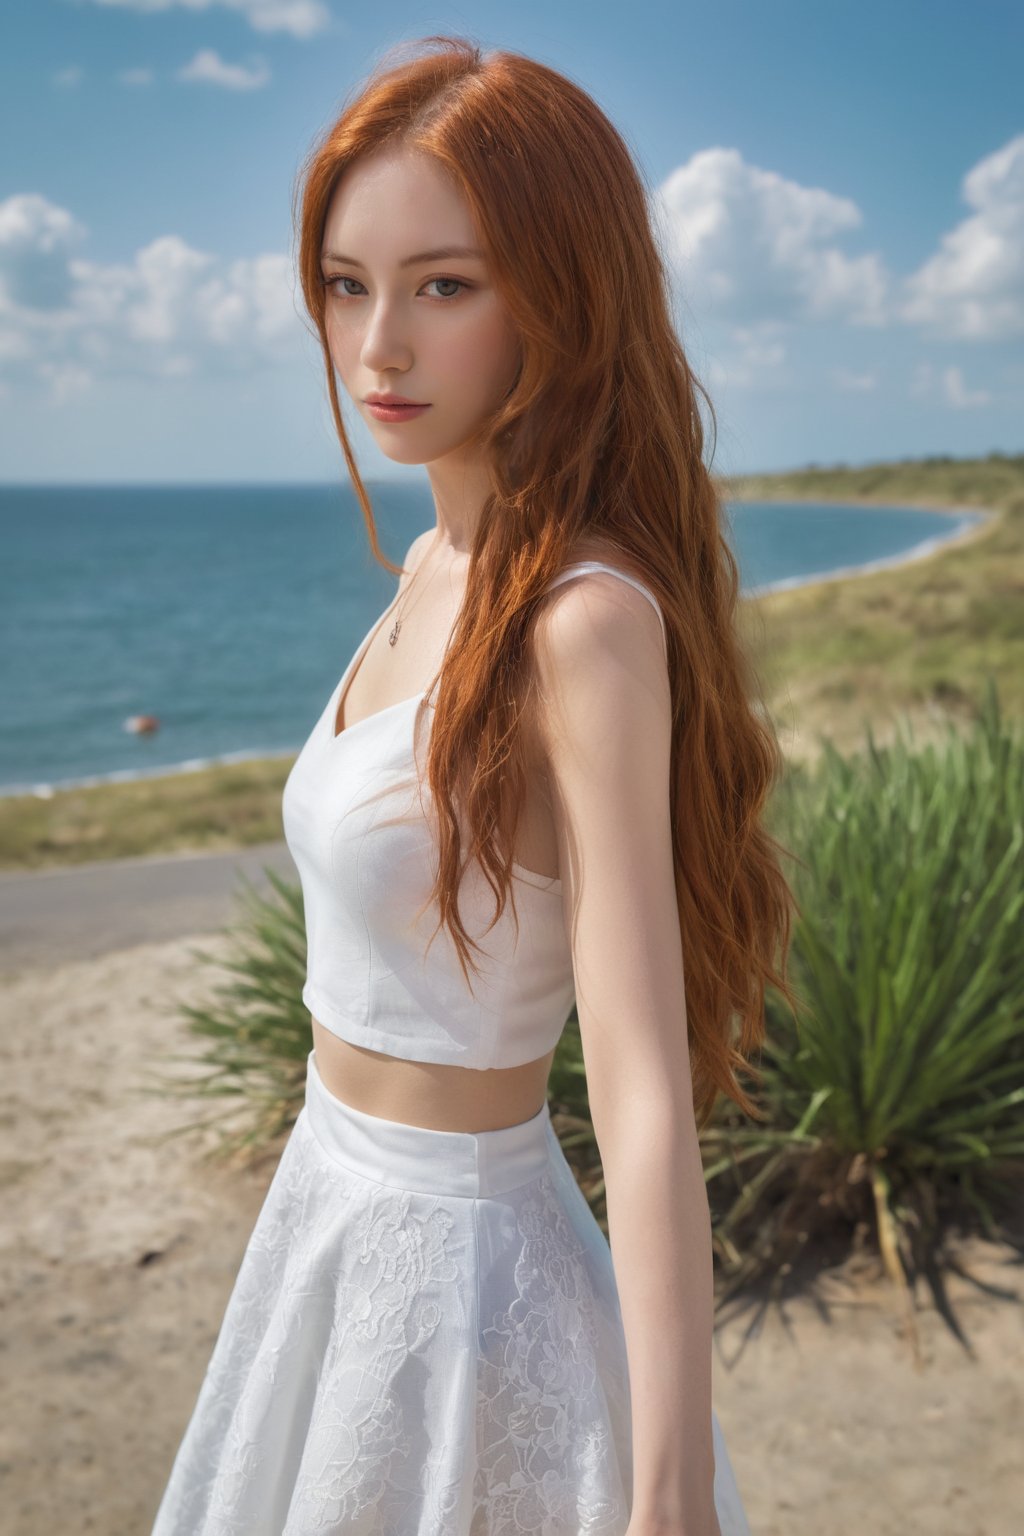  photorealistic,portrait of hubggirl, 
(ultra realistic,best quality),photorealistic,Extremely Realistic, in depth, cinematic light,

1girl,(long red hair:1.4),outdoors,(front:1.3),(standing:1.3),seaside,cloudy sky,High-low skirt,(cowboy_shot:1.2),navelwavy hair, 

perfect lighting, vibrant colors, intricate details, high detailed skin, pale skin, intricate background, realism,realistic,raw,analog,portrait,photorealistic, taken by Canon EOS,SIGMA Art Lens 35mm F1.4,ISO 200 Shutter Speed 2000,Vivid picture,